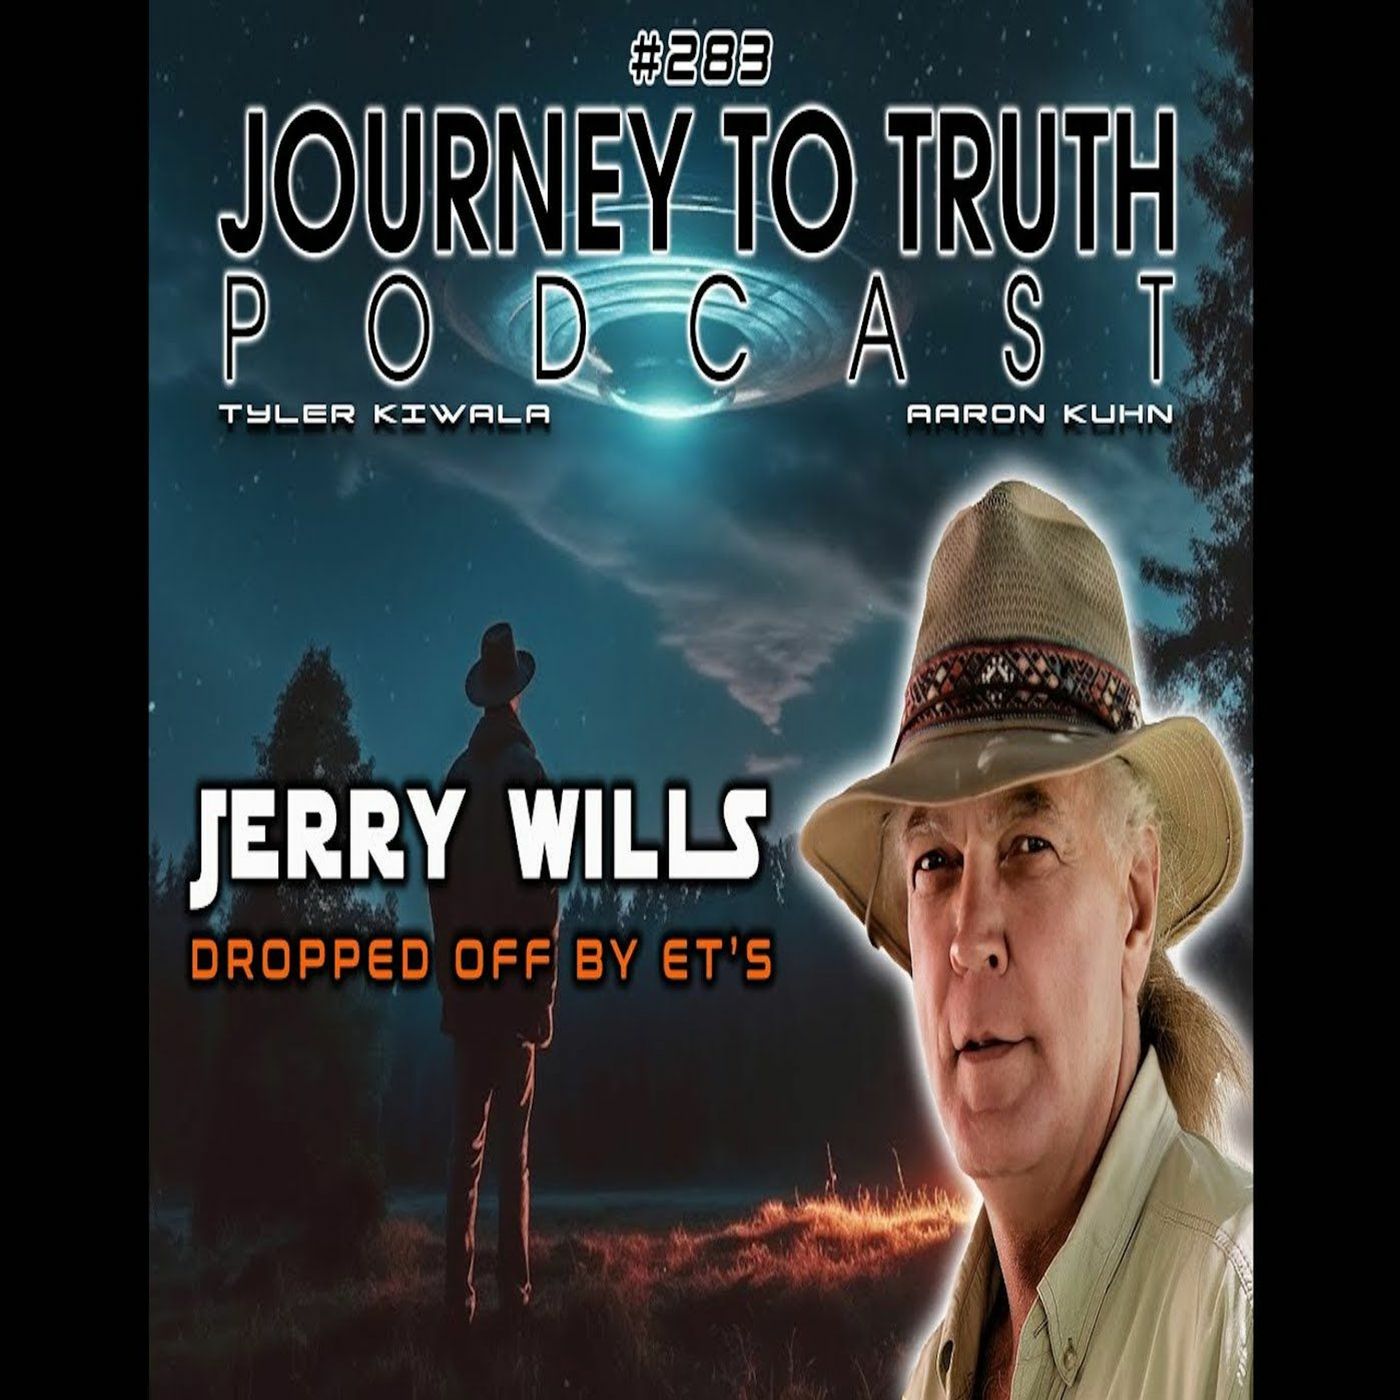 EP 283 - Jerry Wills: Dropped Off By ET's - Found In Abandoned Farm House & Adopted By Army Officer